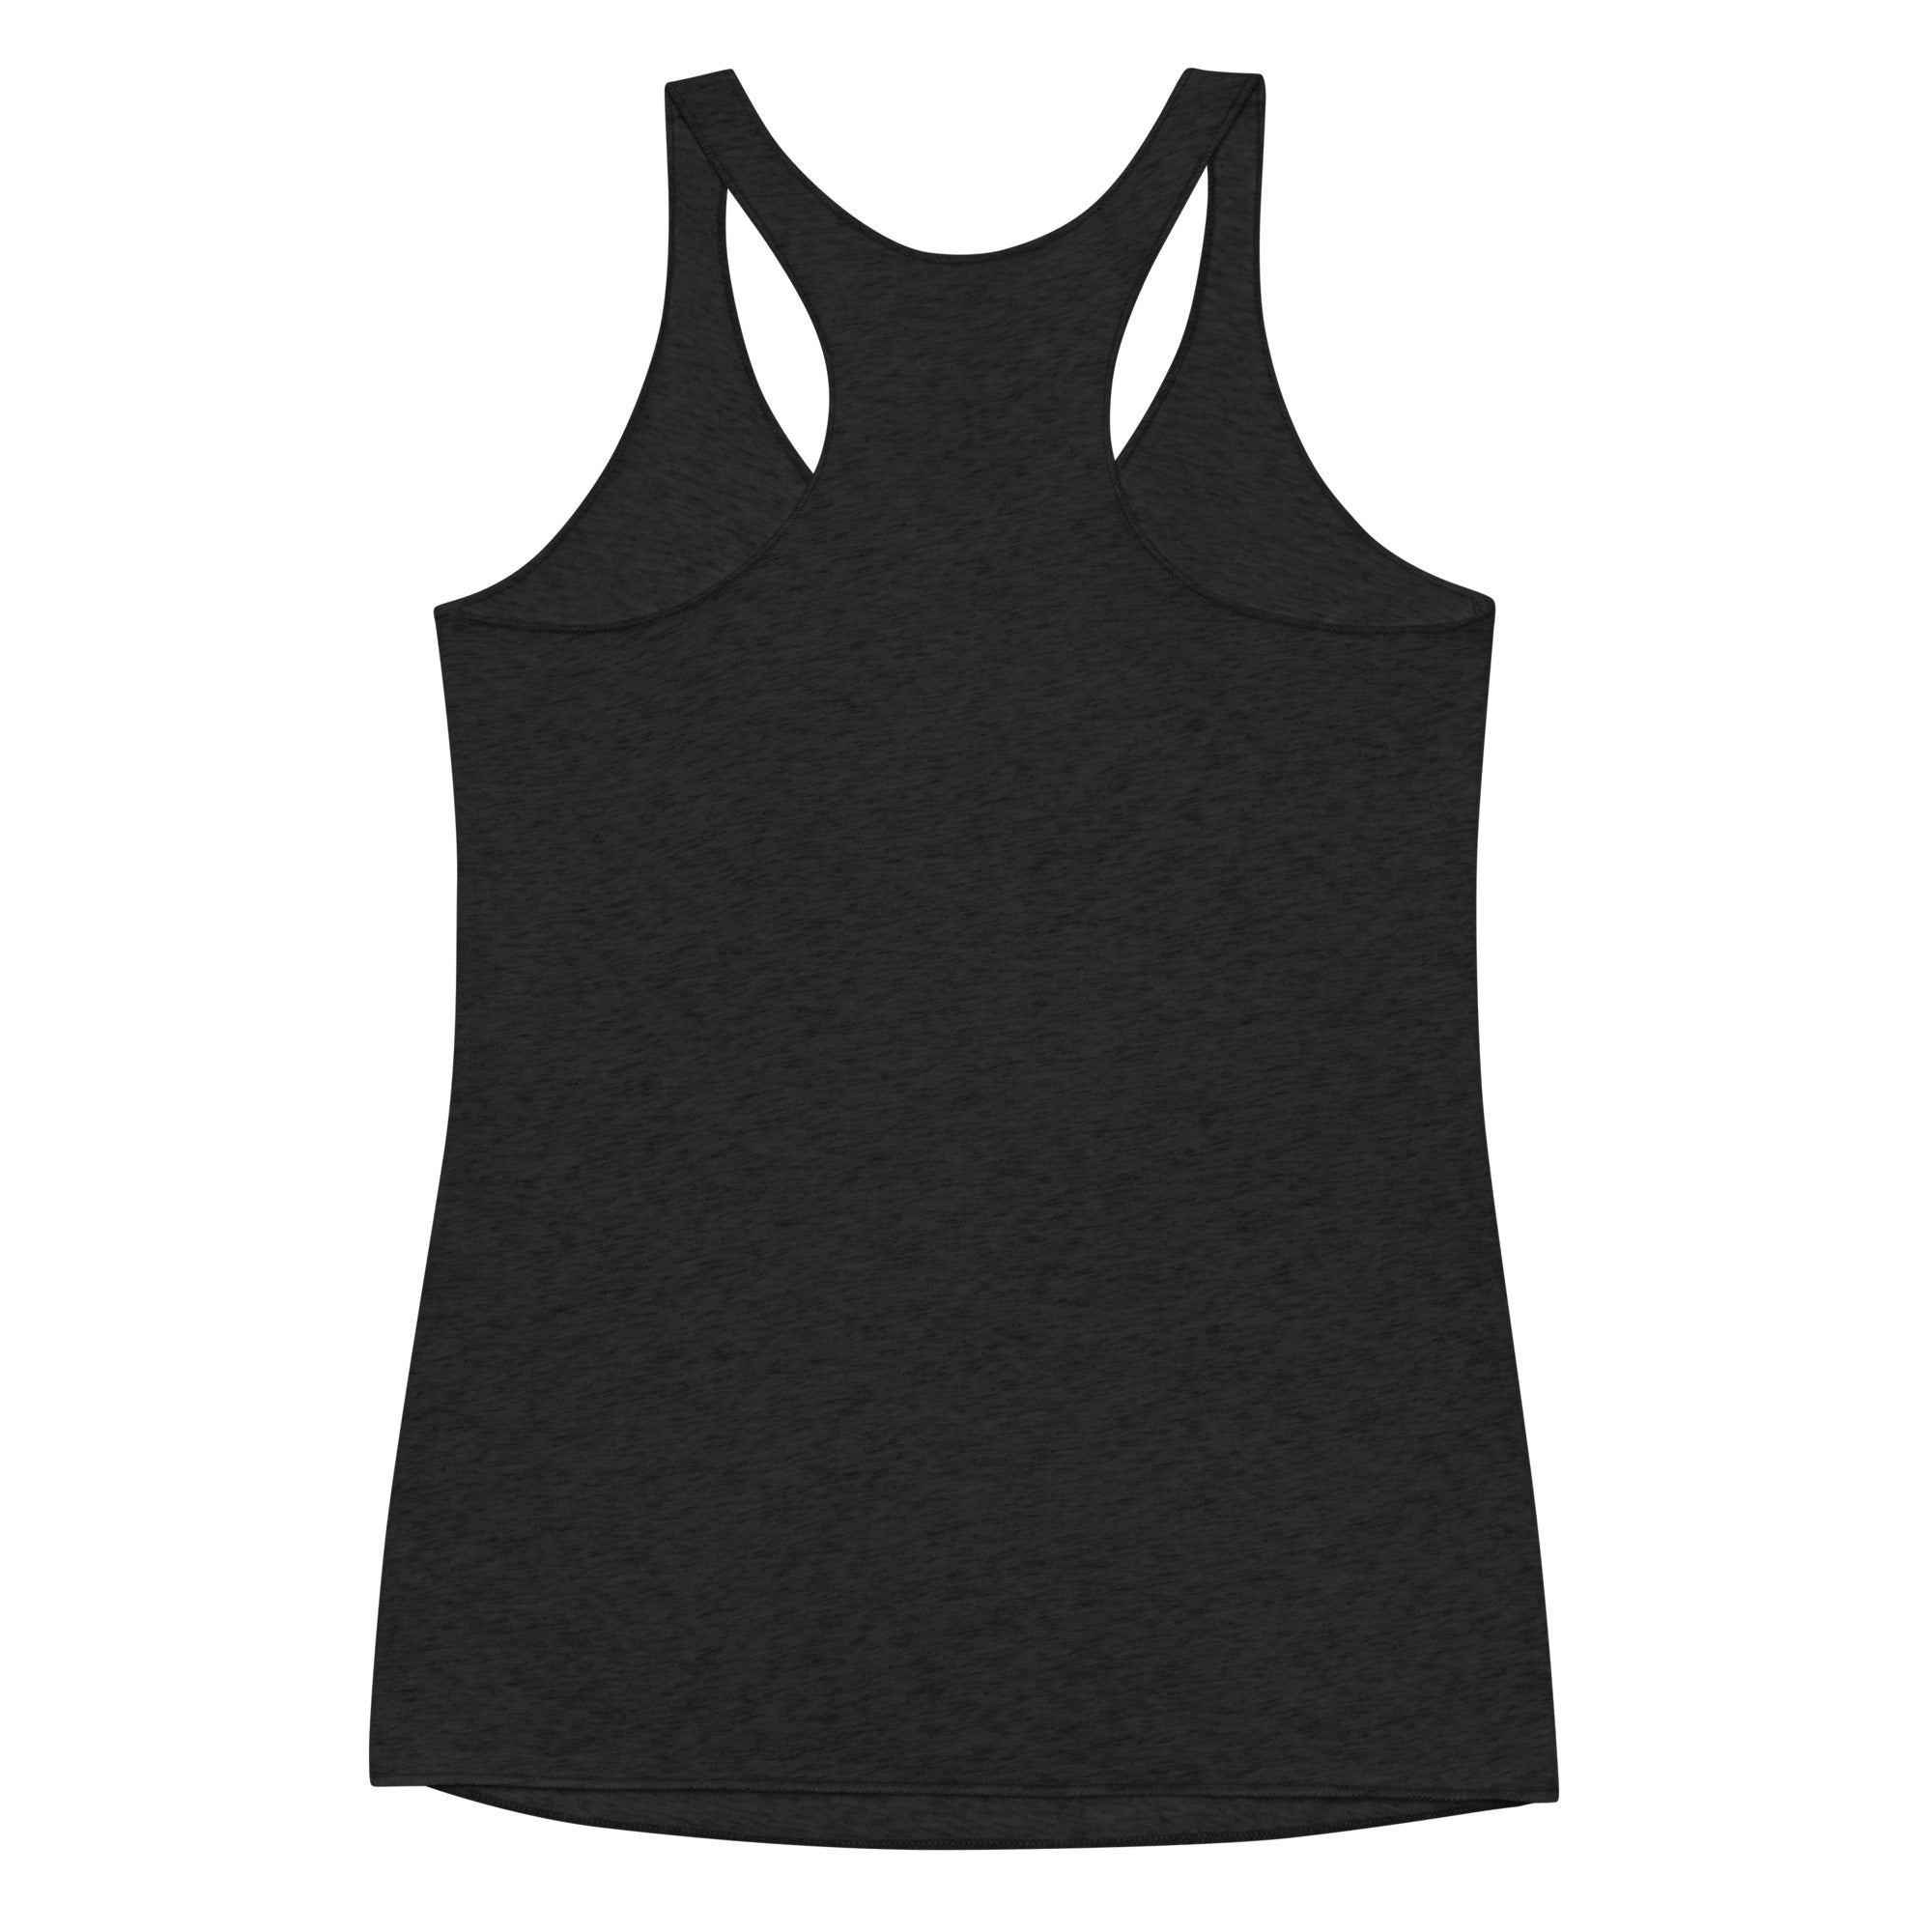 Guns are Awesome Women's Racerback Tank